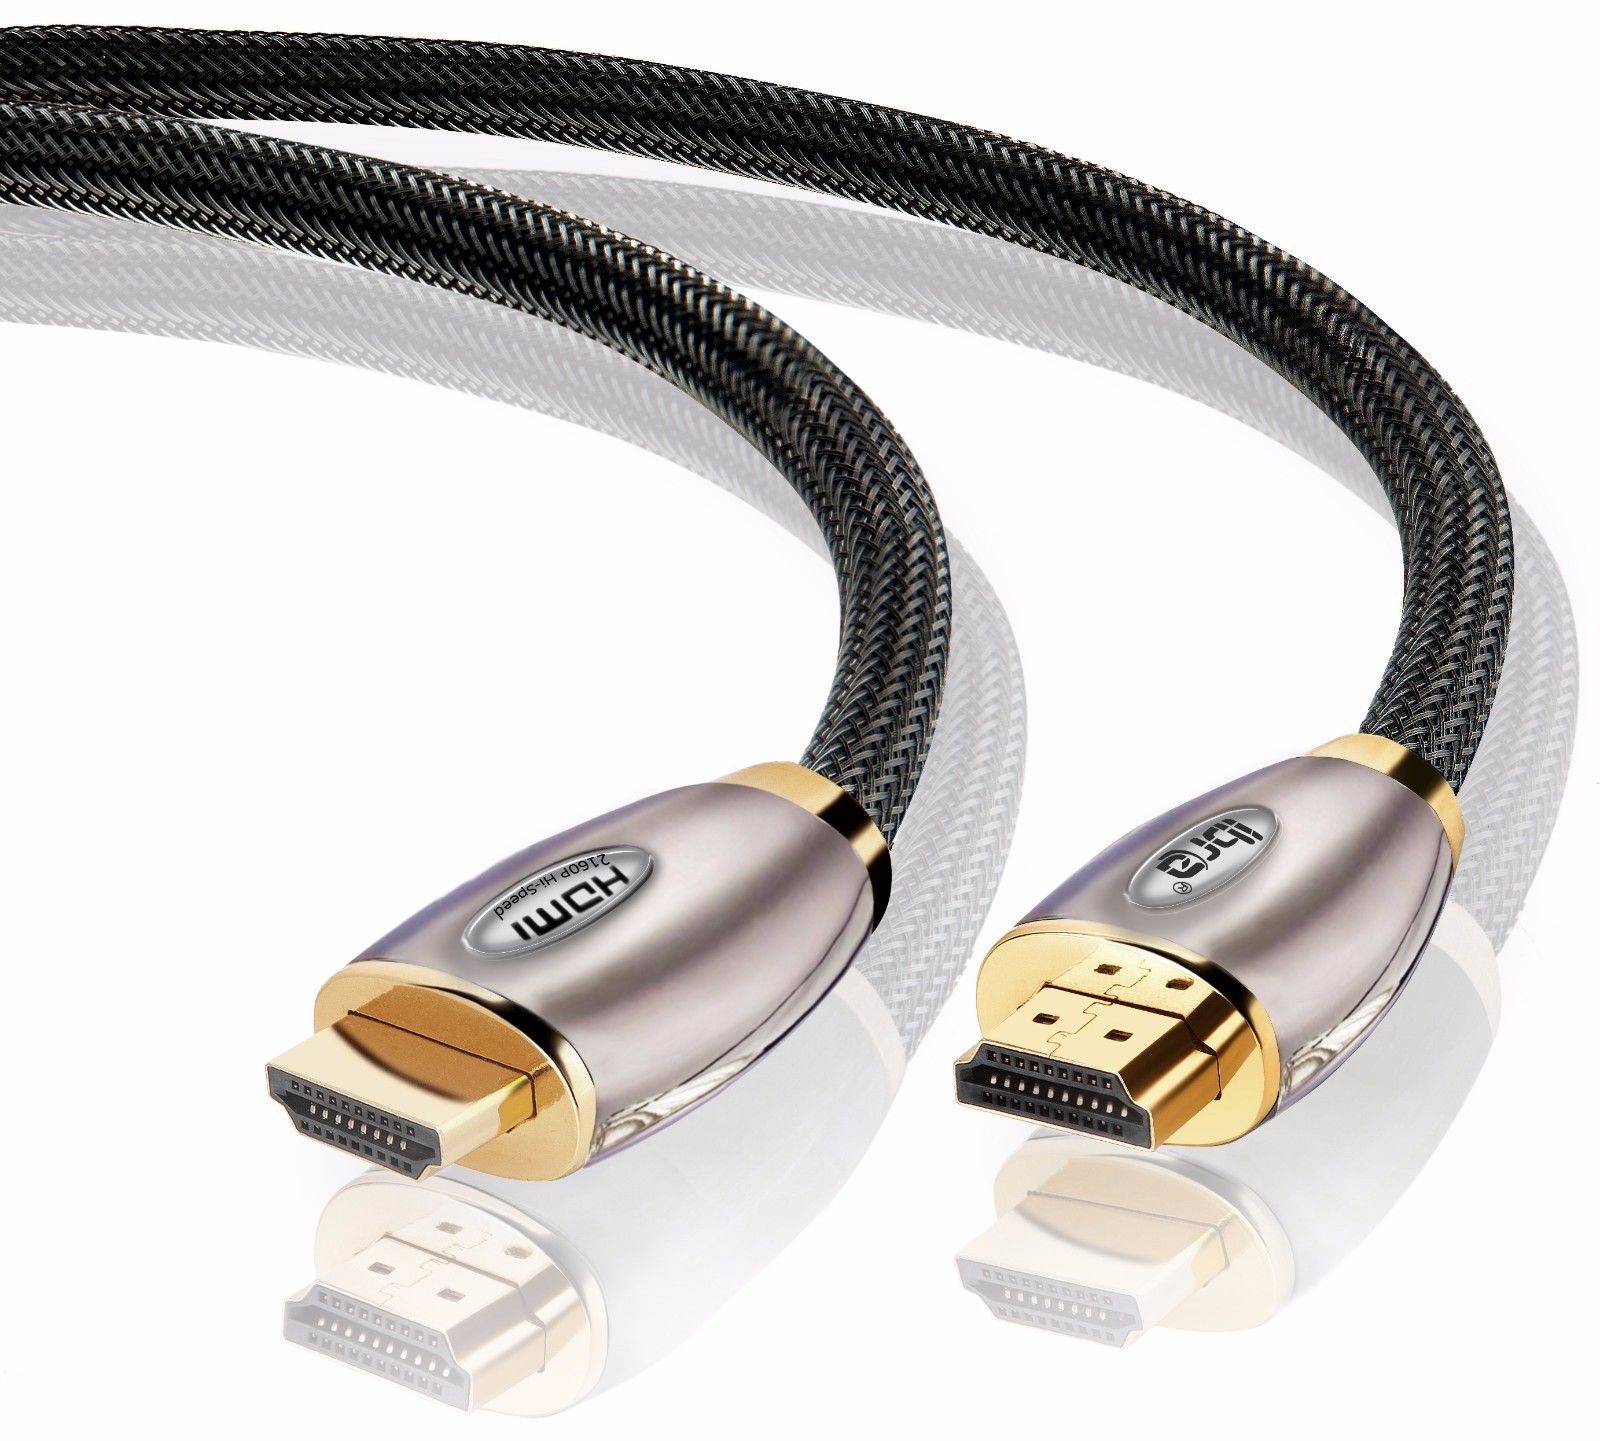 Cable HDMI-HDMI 2.0 Ultra HD 4k 60fps 18gbps 5 metros